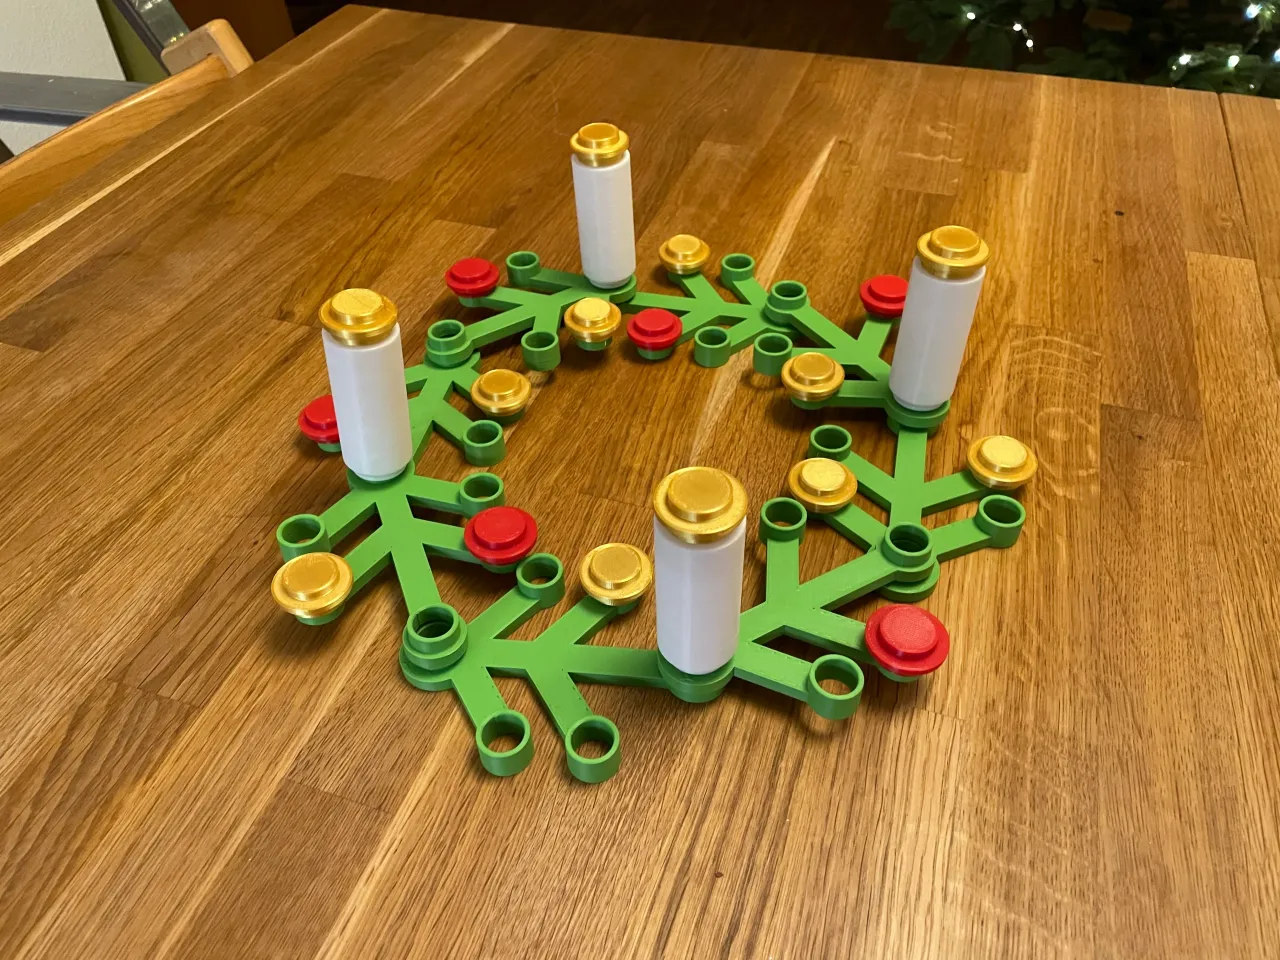 Candles for Christmas Lego Wreath by the.pfrank